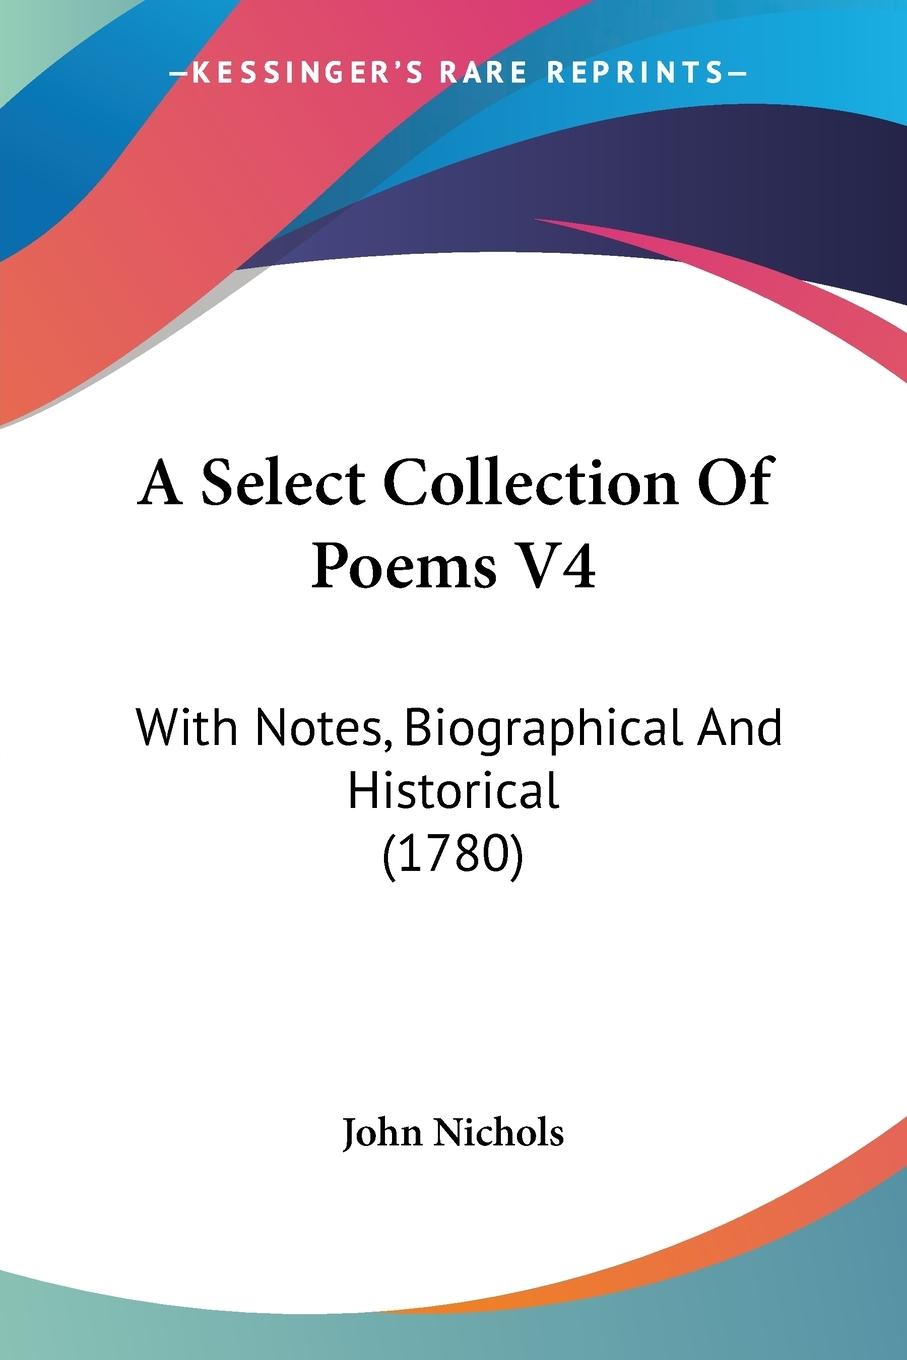 A Select Collection Of Poems V4 - John Nichols